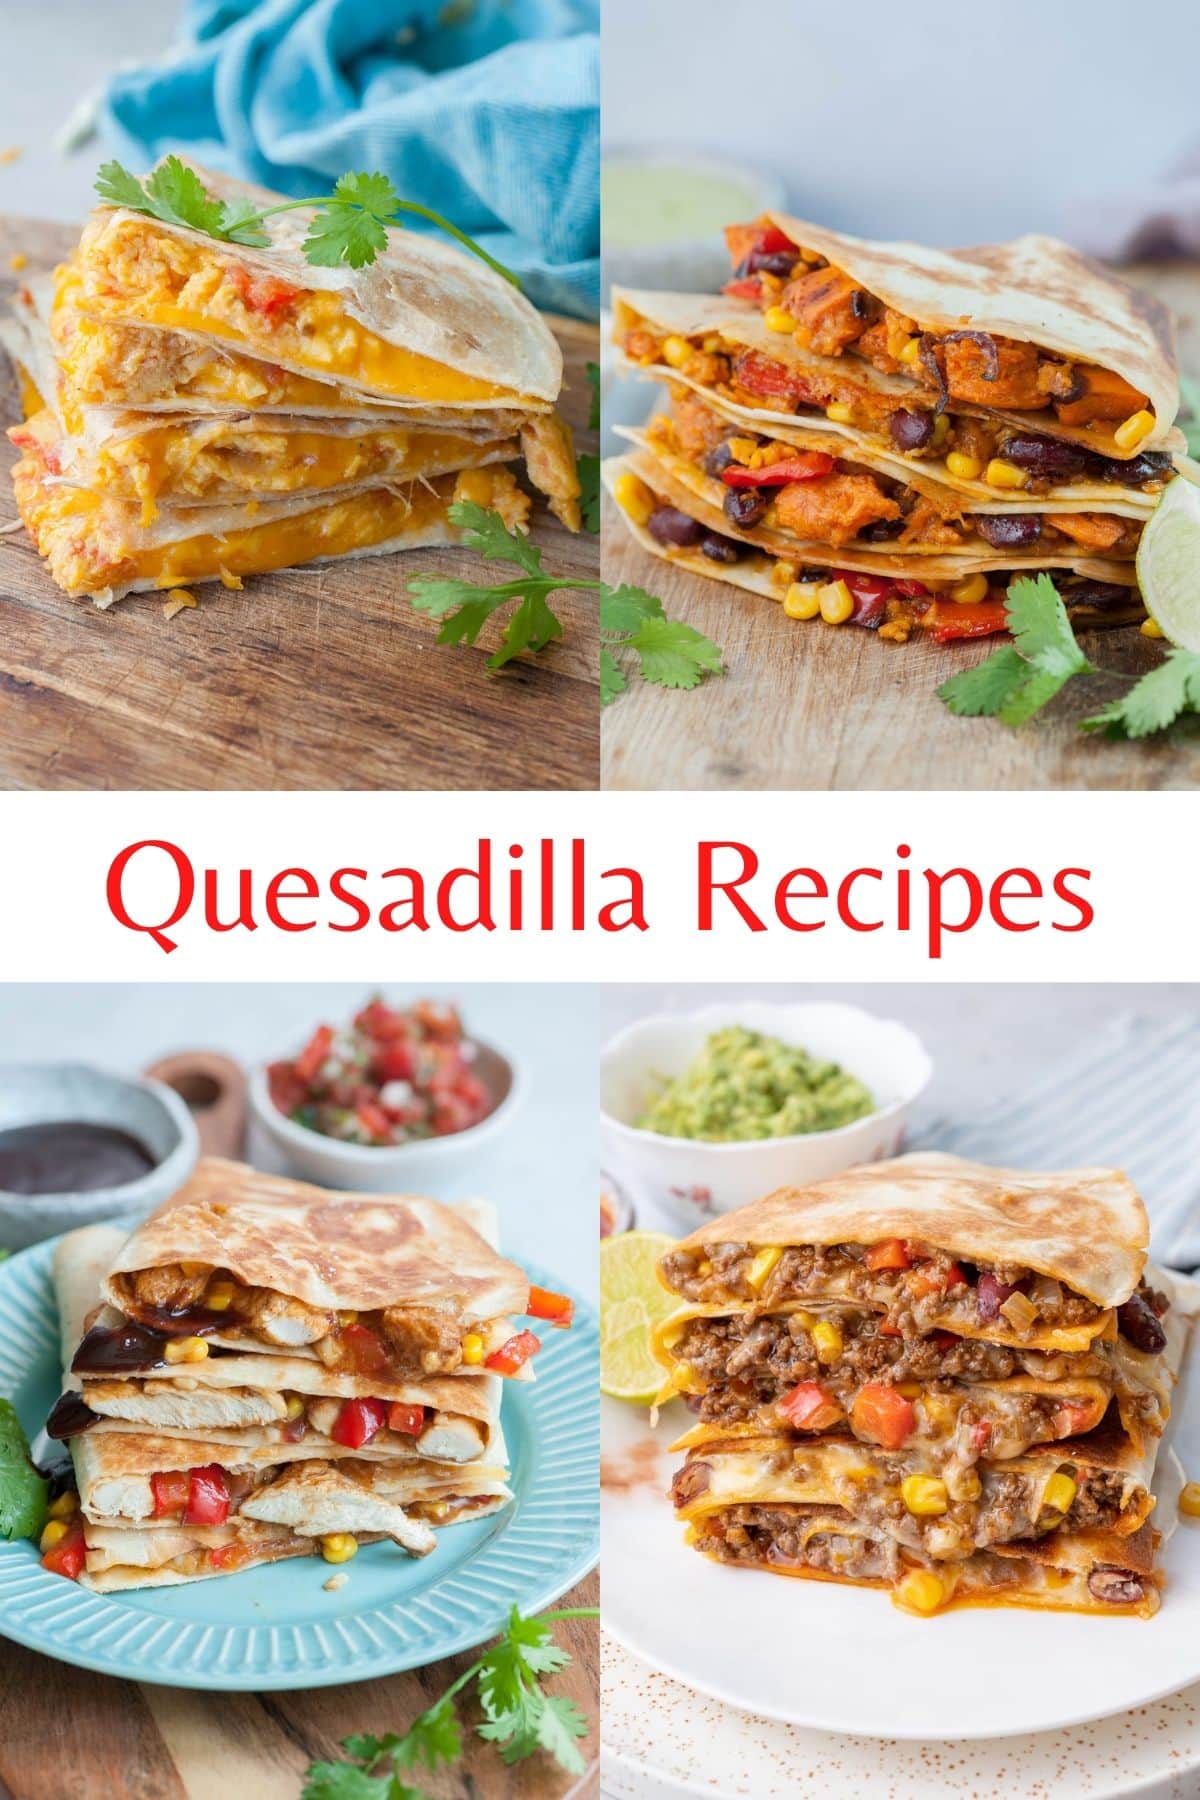 Easy and Delicious Quesadilla Recipes for Any Occasion